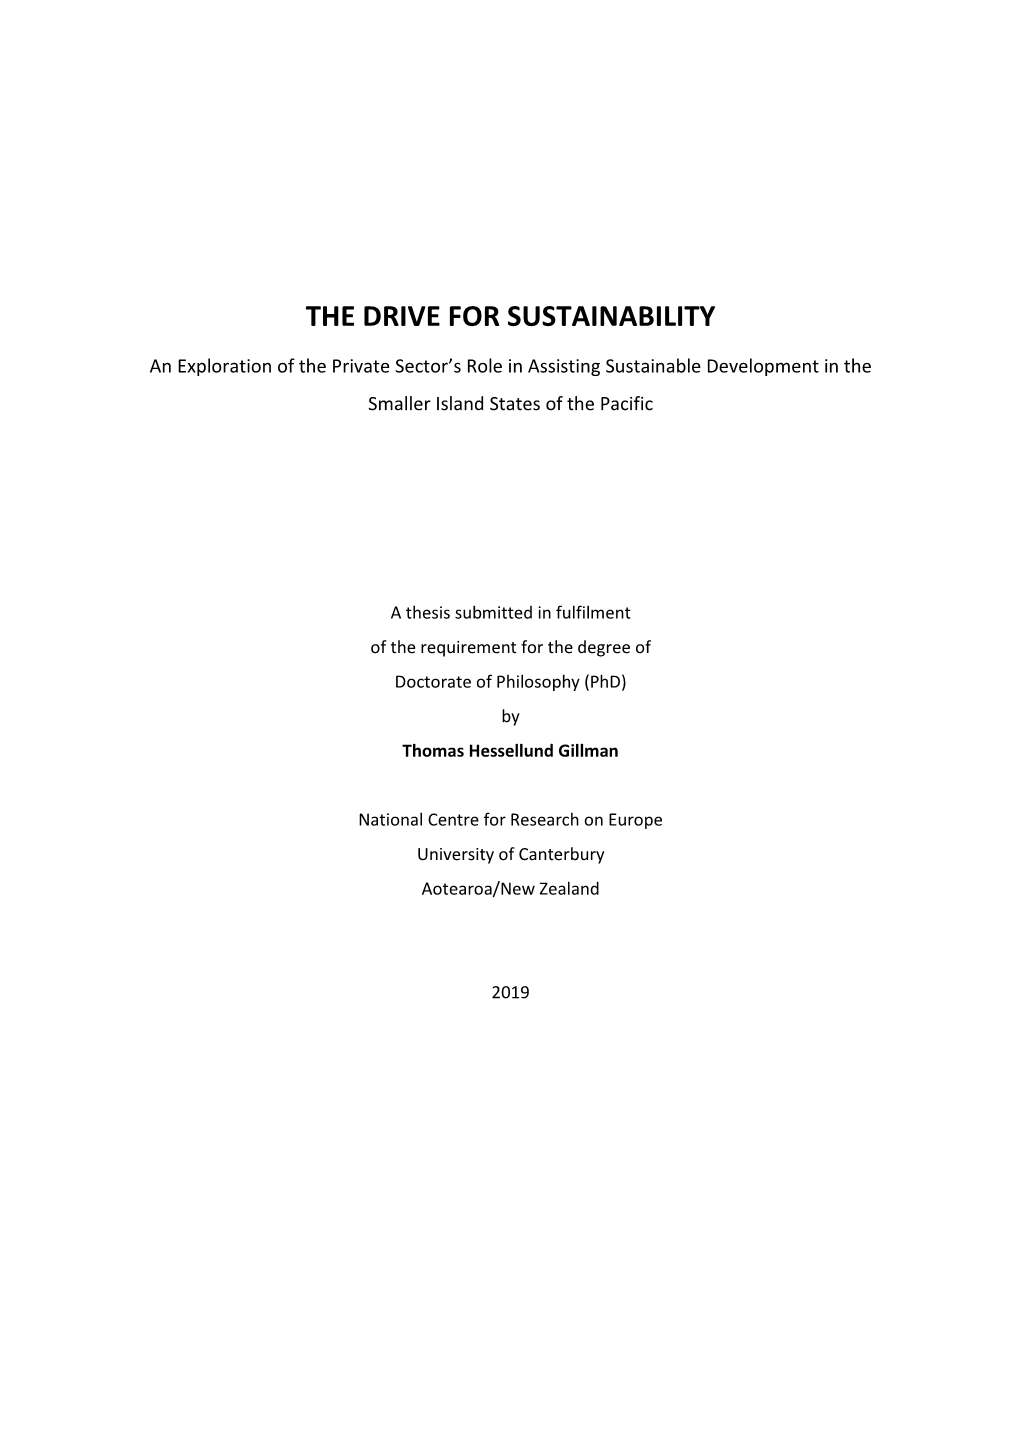 The Drive for Sustainability